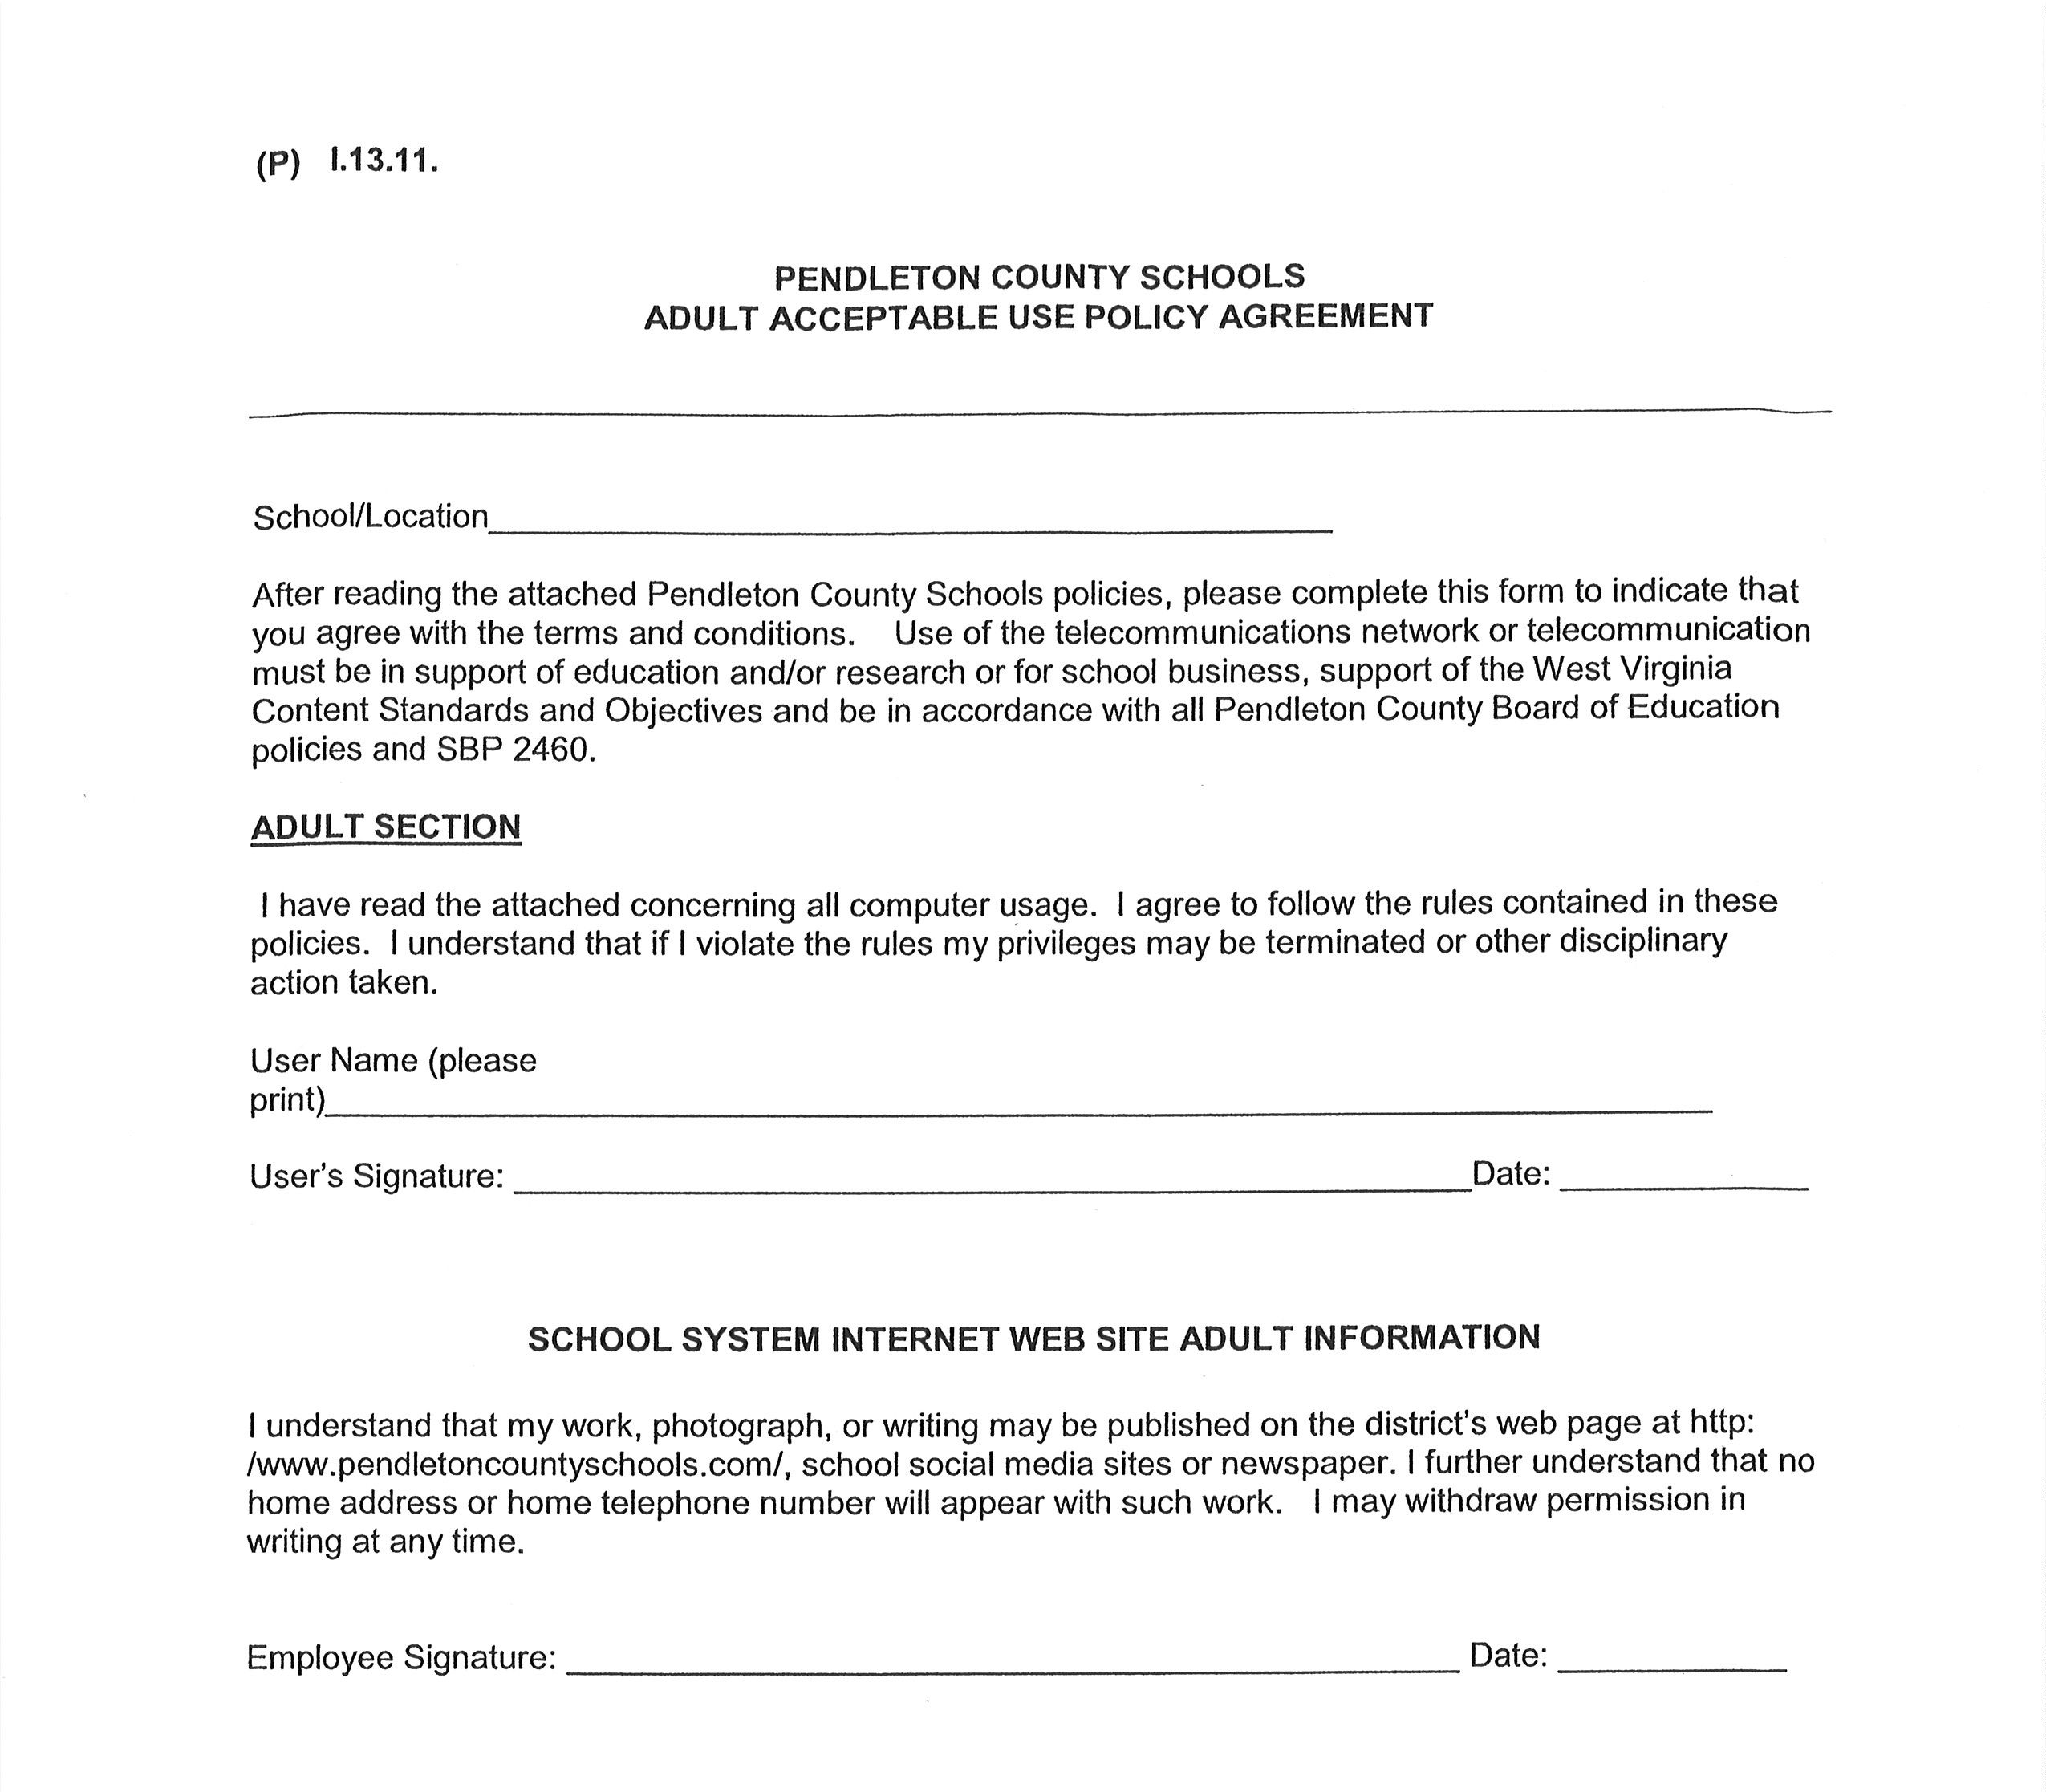 Click for the PDF form of the document